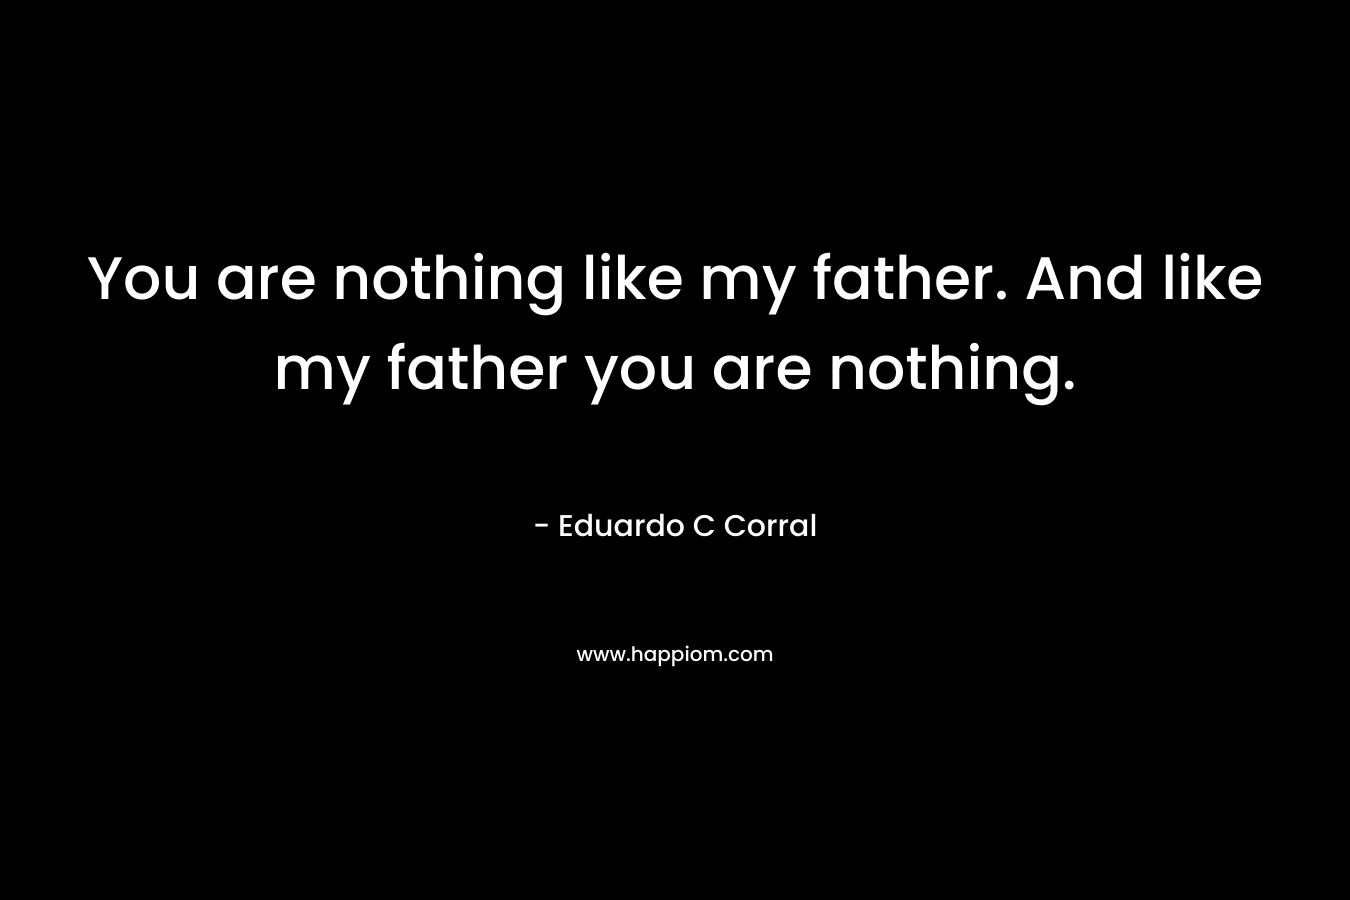 You are nothing like my father. And like my father you are nothing.